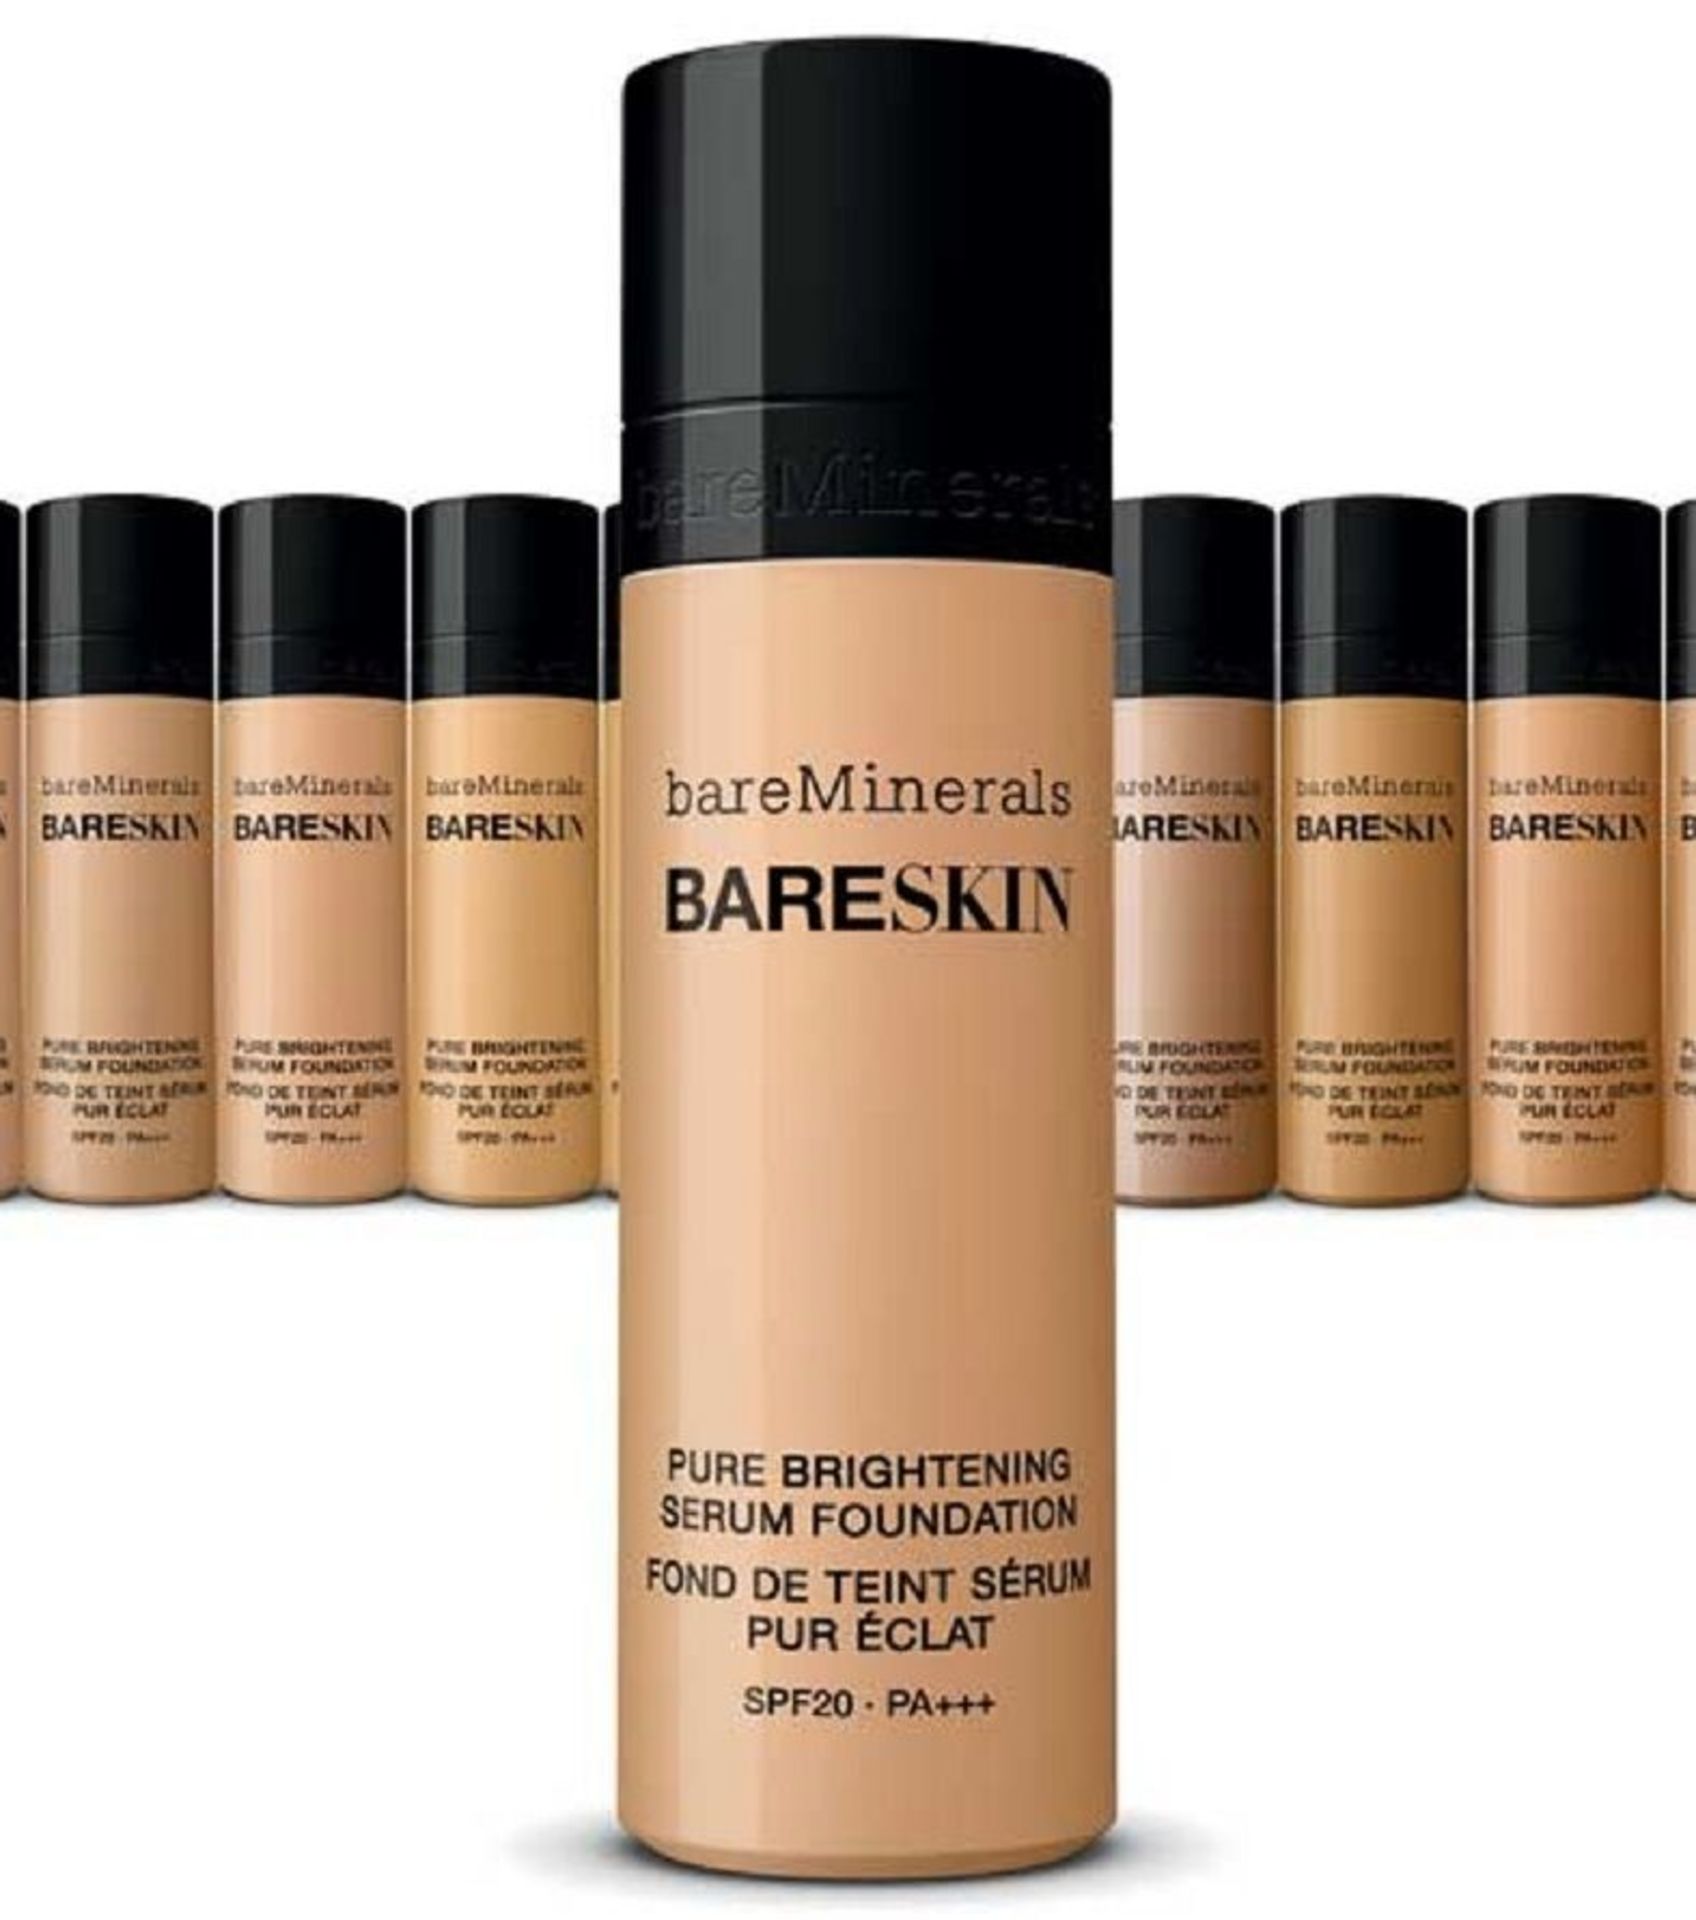 1 x Bare Escentuals bareMinerals “BARESKIN” Perfecting Face Brush - Genuine Product - Brand New - Image 7 of 14